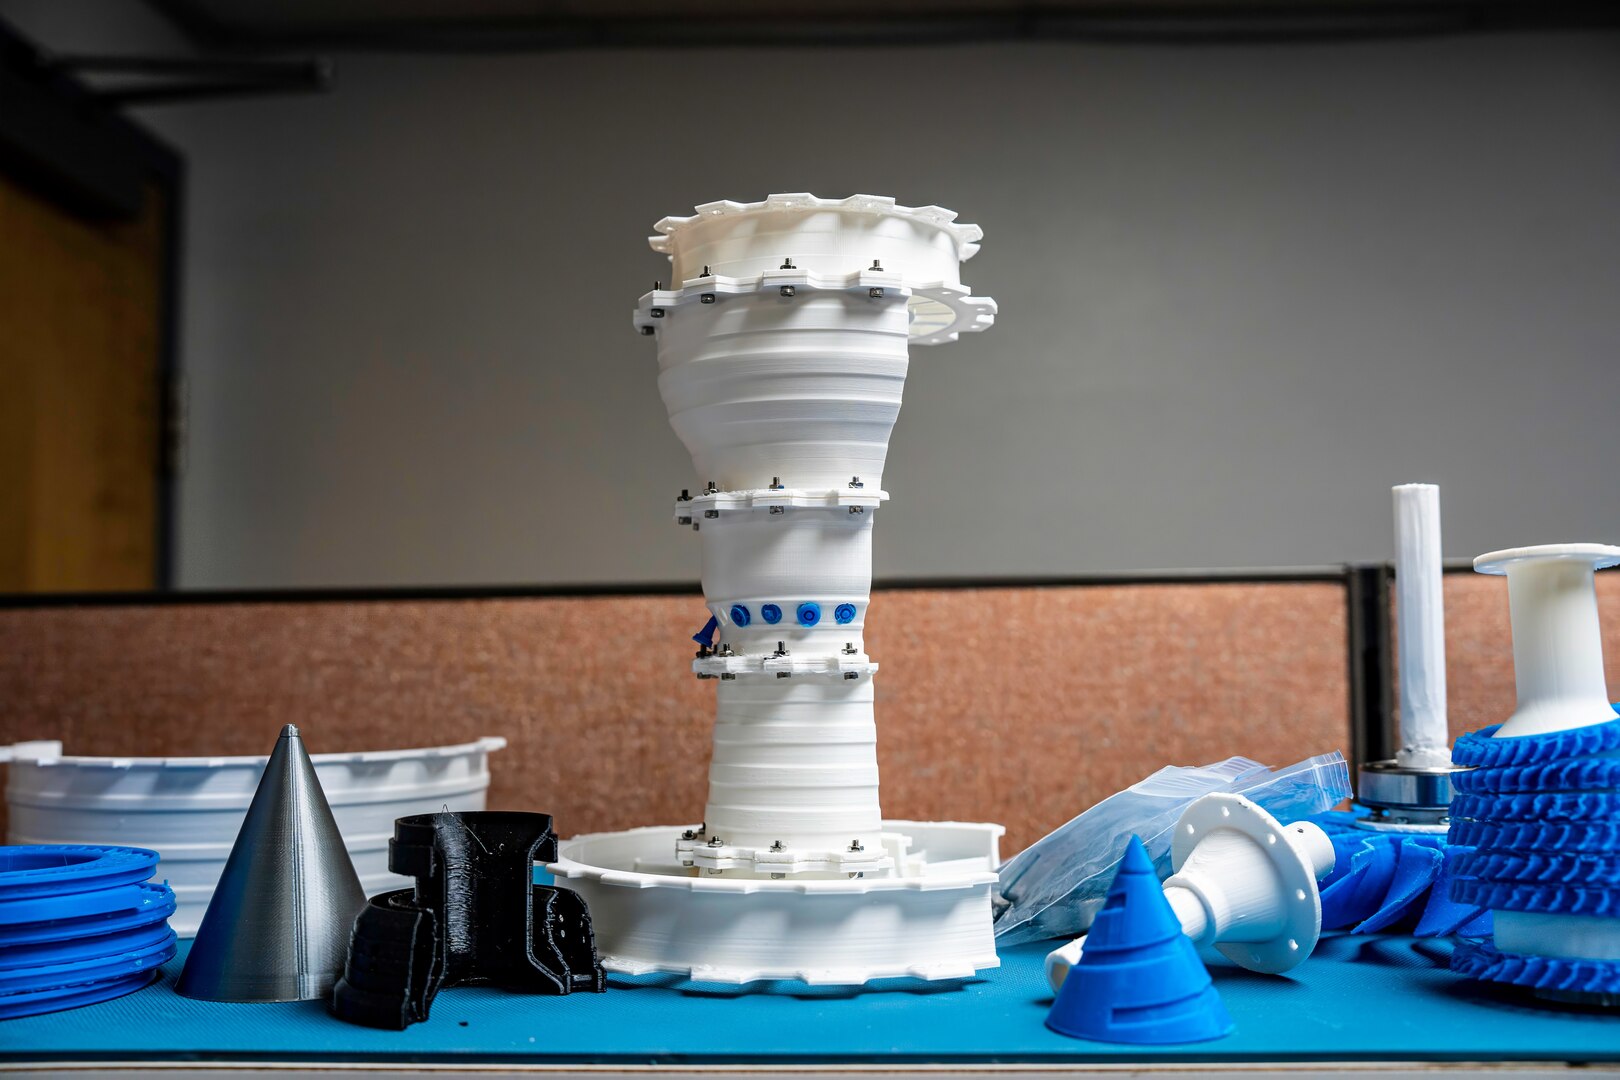 A 3D printed model of a jet engine.